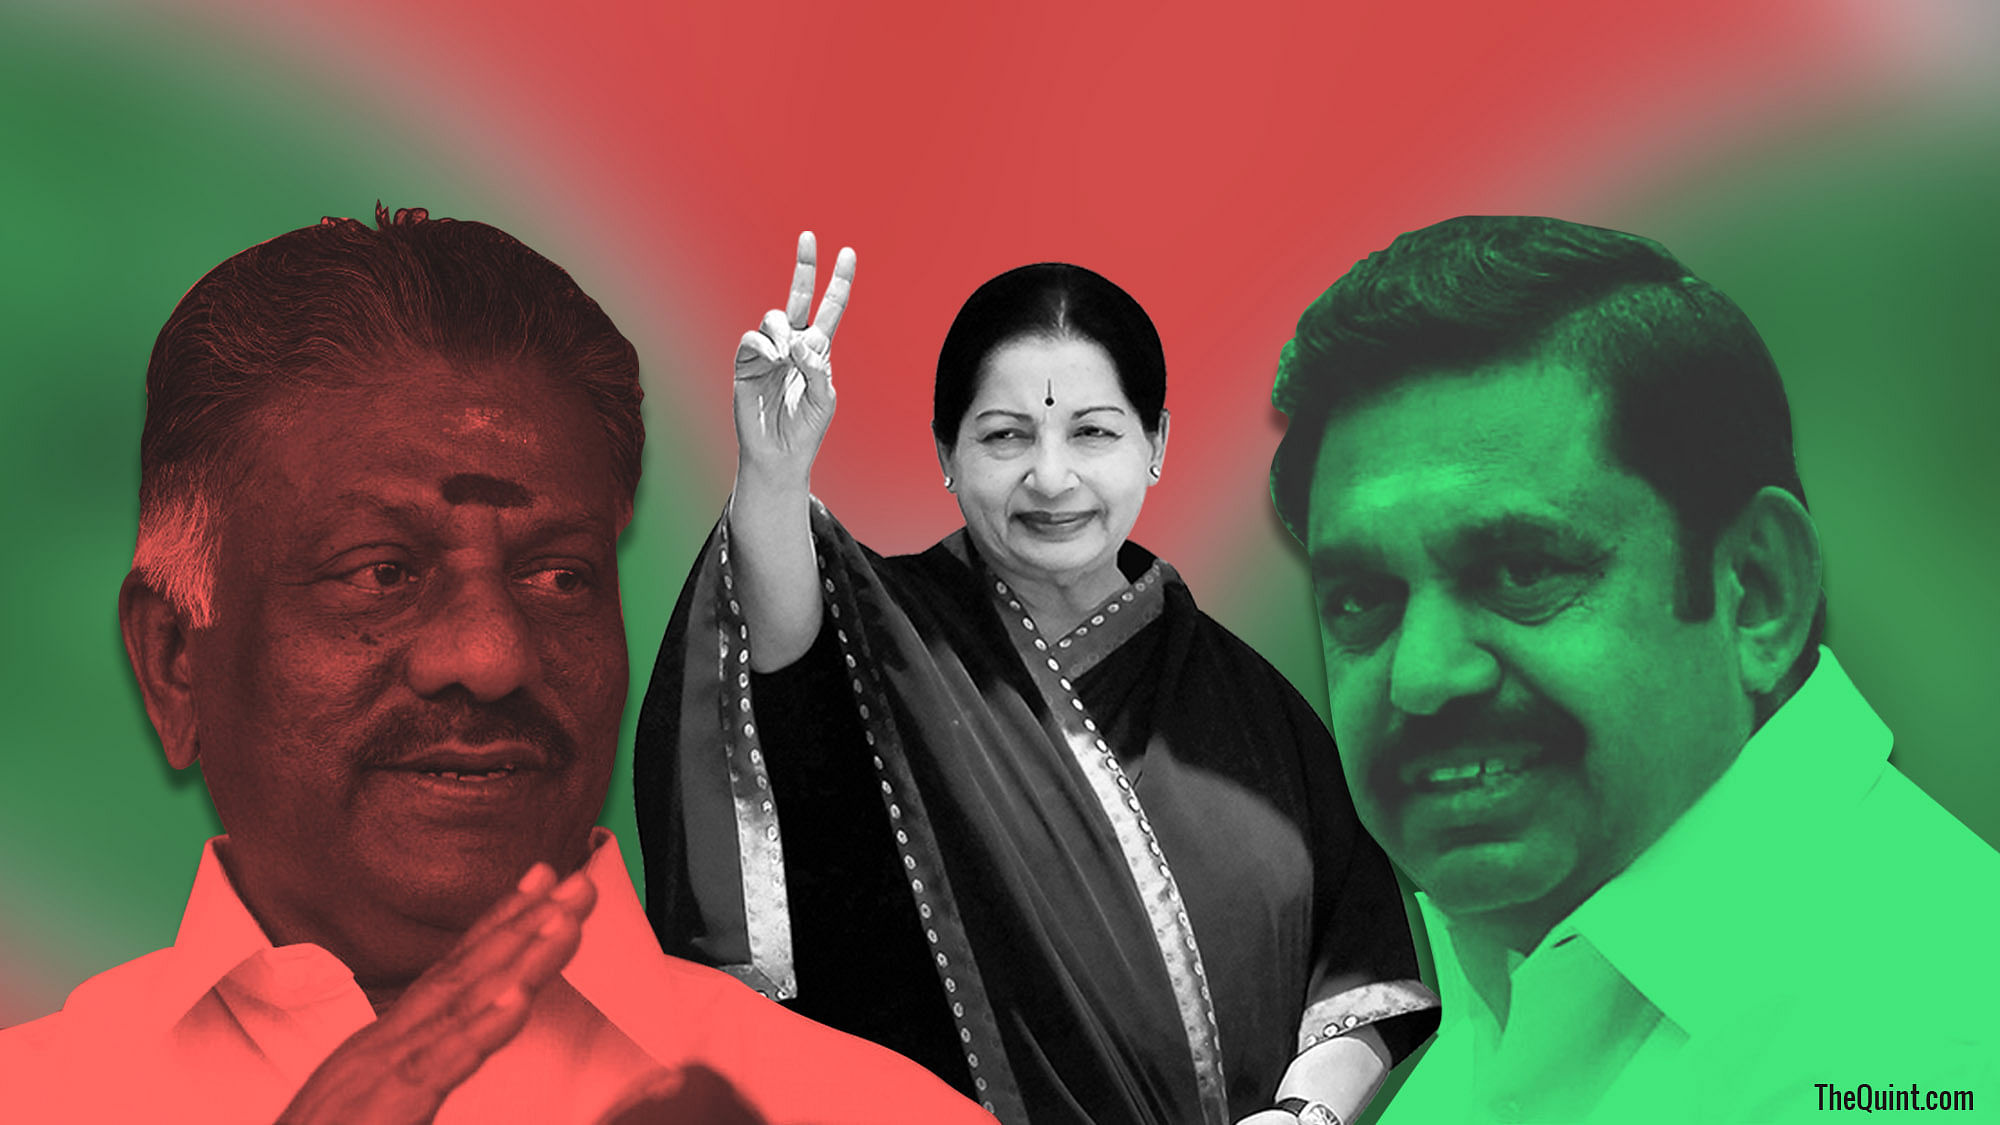 The political turmoil in Tamil Nadu continues, six months after the death of former Tamil Nadu Chief Minister and AIADMK chief J Jayalalithaa.